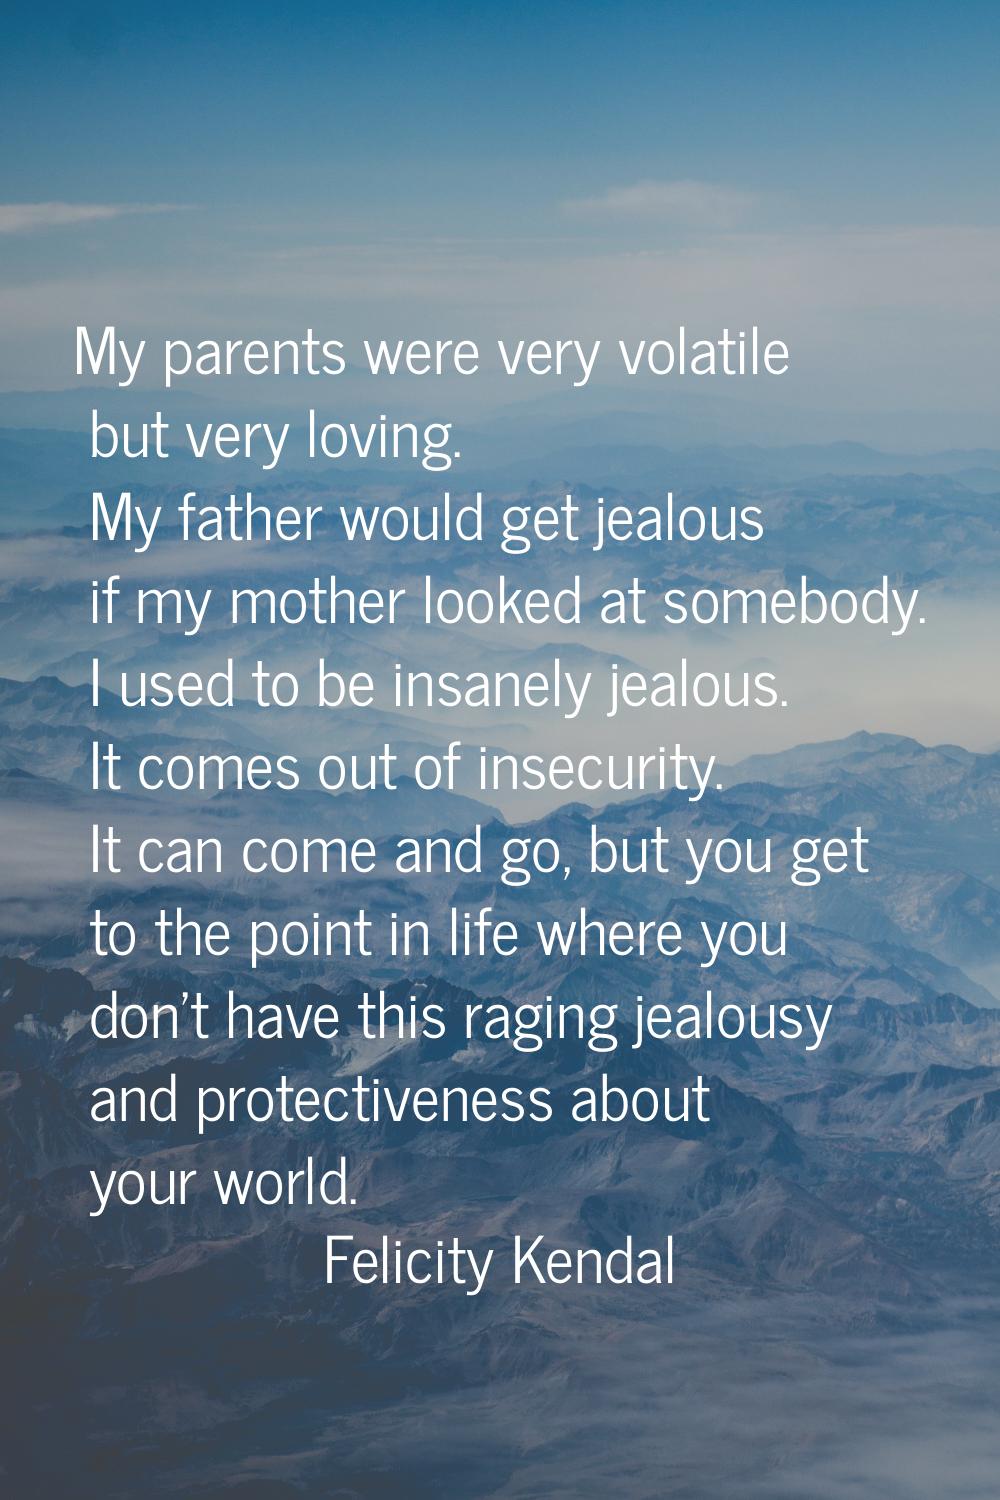 My parents were very volatile but very loving. My father would get jealous if my mother looked at s